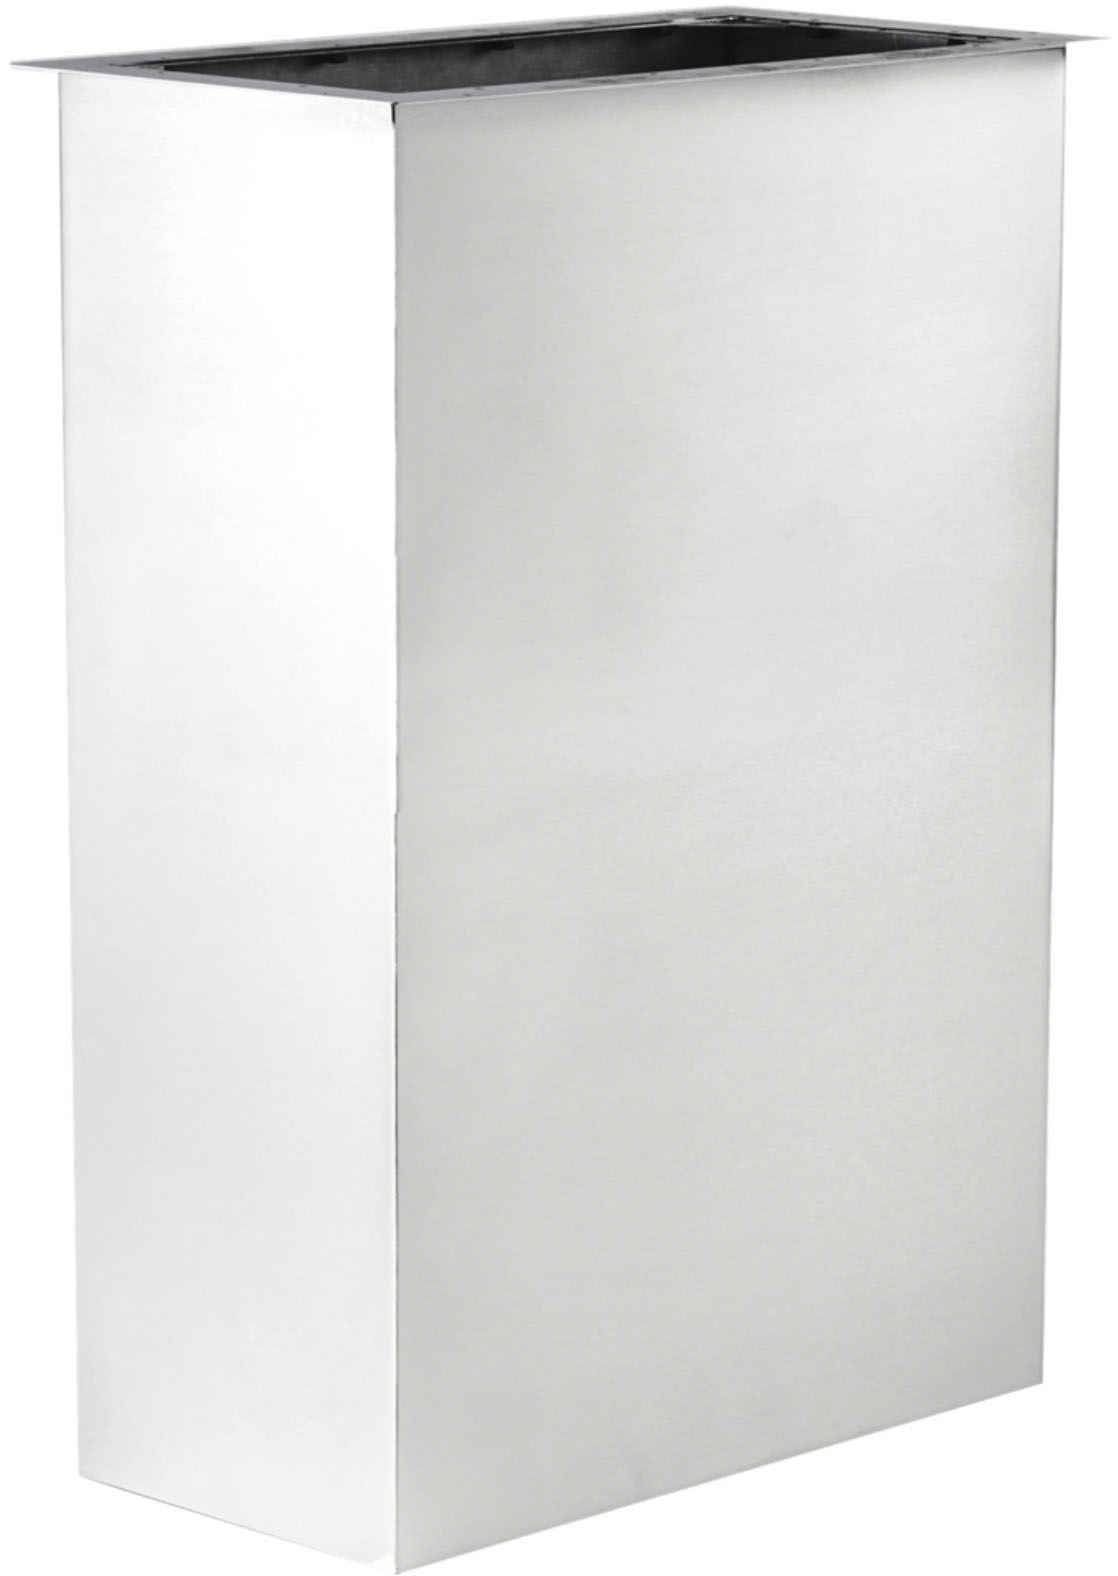 Viking - 18" Chimney Hood Duct Cover Extension - White